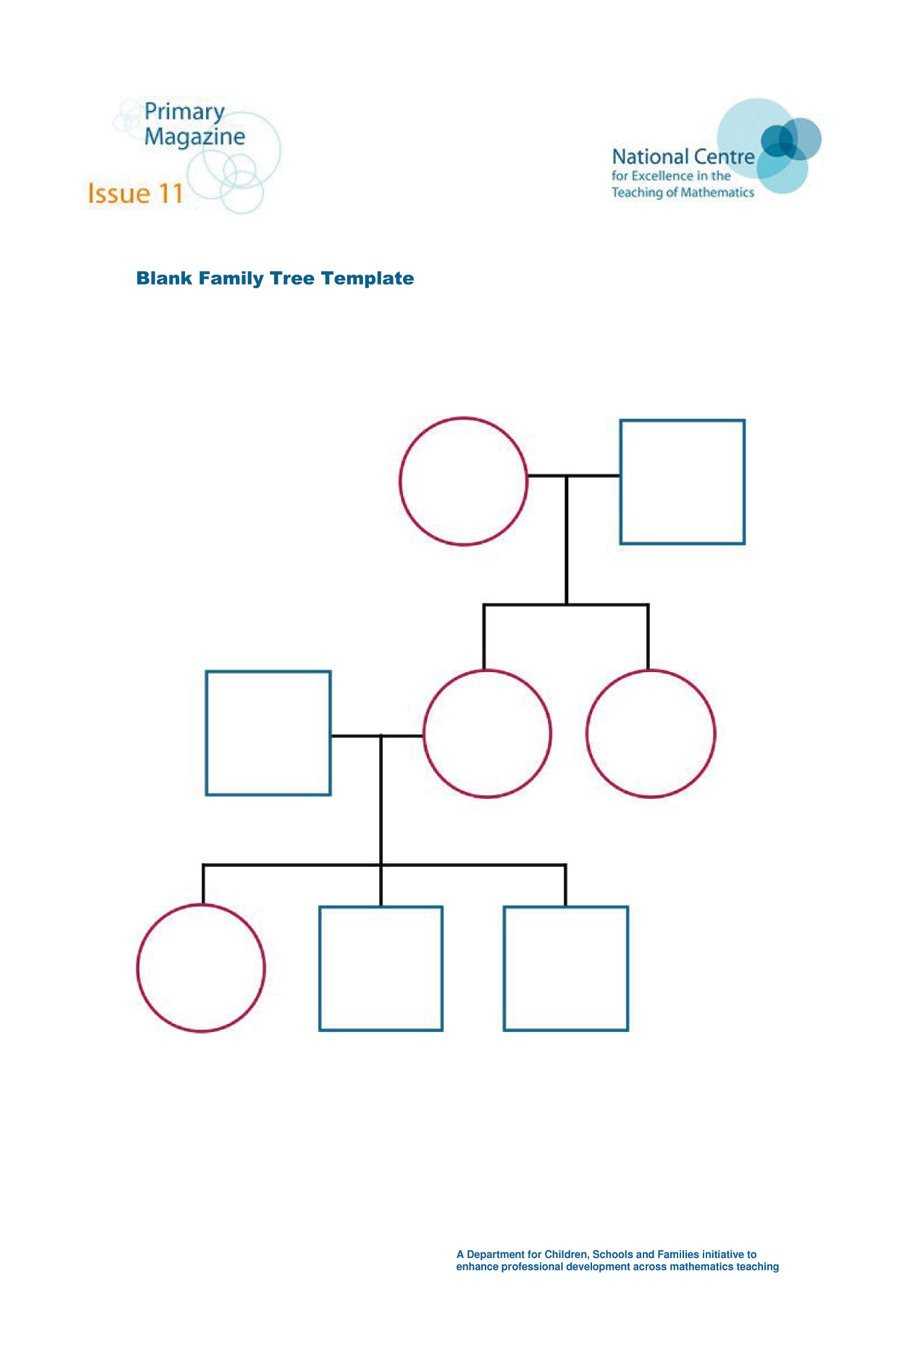 50+ Free Family Tree Templates (Word, Excel, Pdf) ᐅ With Blank Family Tree Template 3 Generations